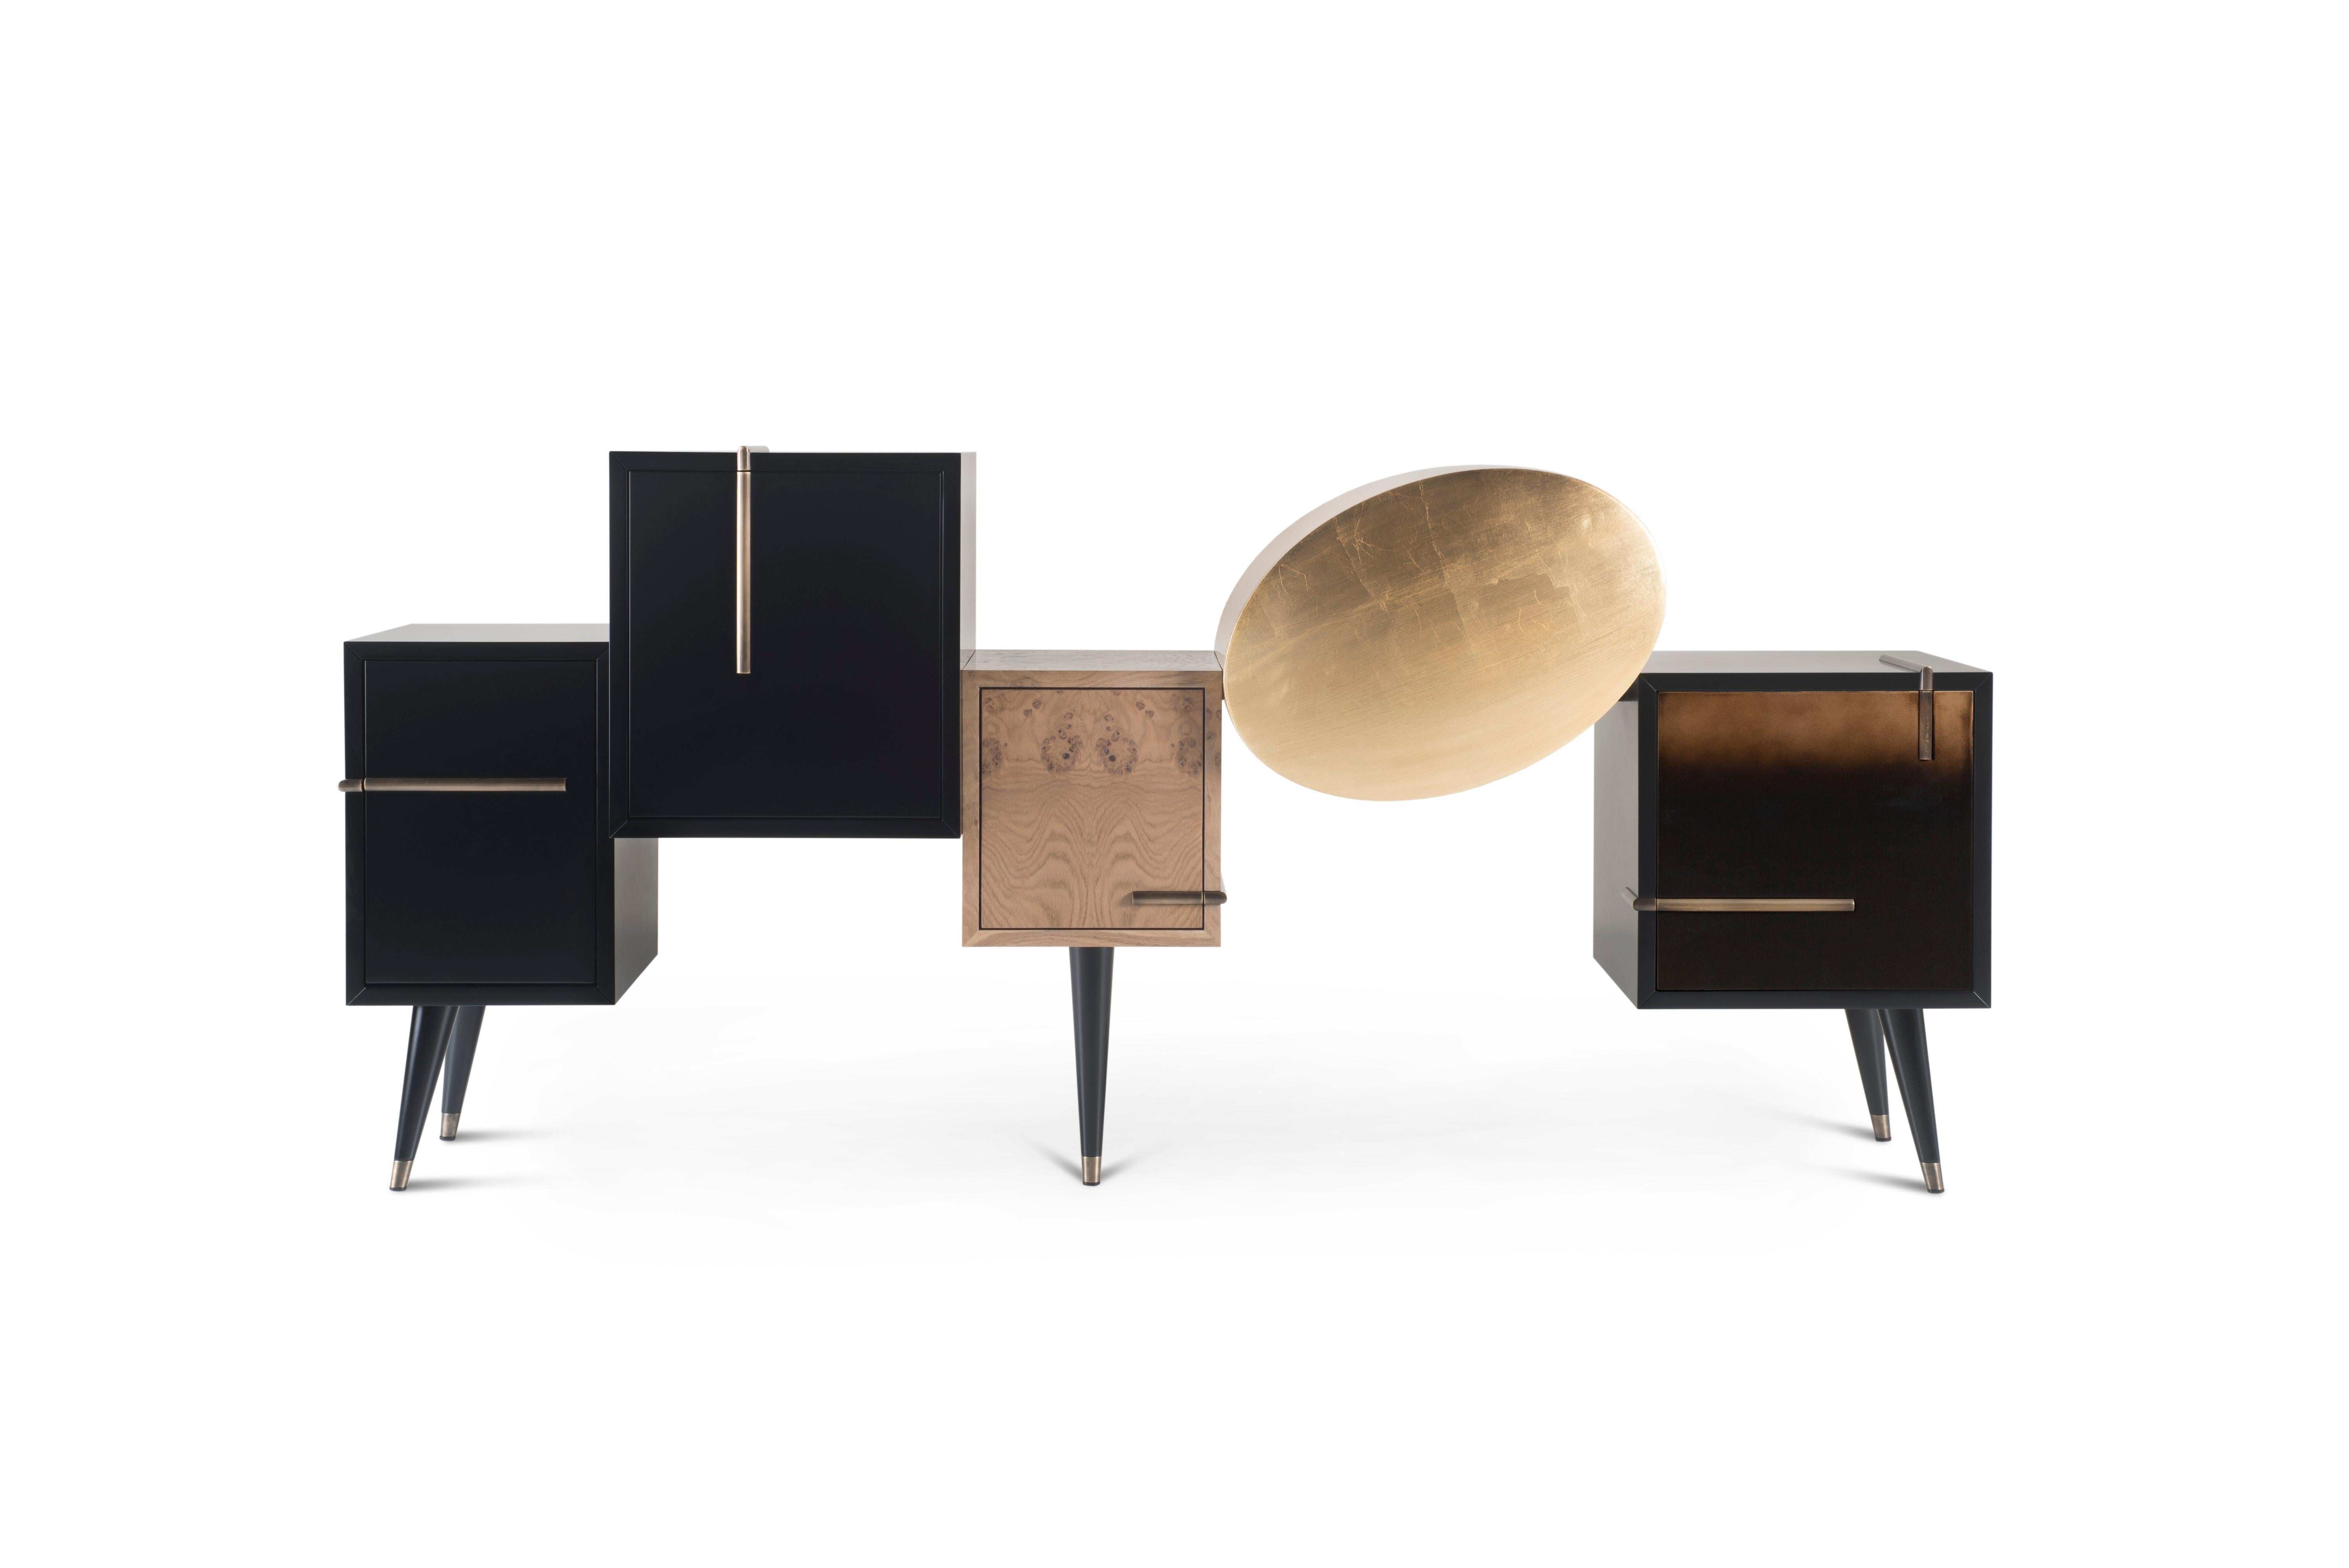 Sunshine Sideboard, Contemporary Collection, Handcrafted in Portugal - Europe by Greenapple.

The Sunshine modern sideboard plays with the light and shade of geometric shapes, presenting a unique and distinctive design for contemporary interiors.